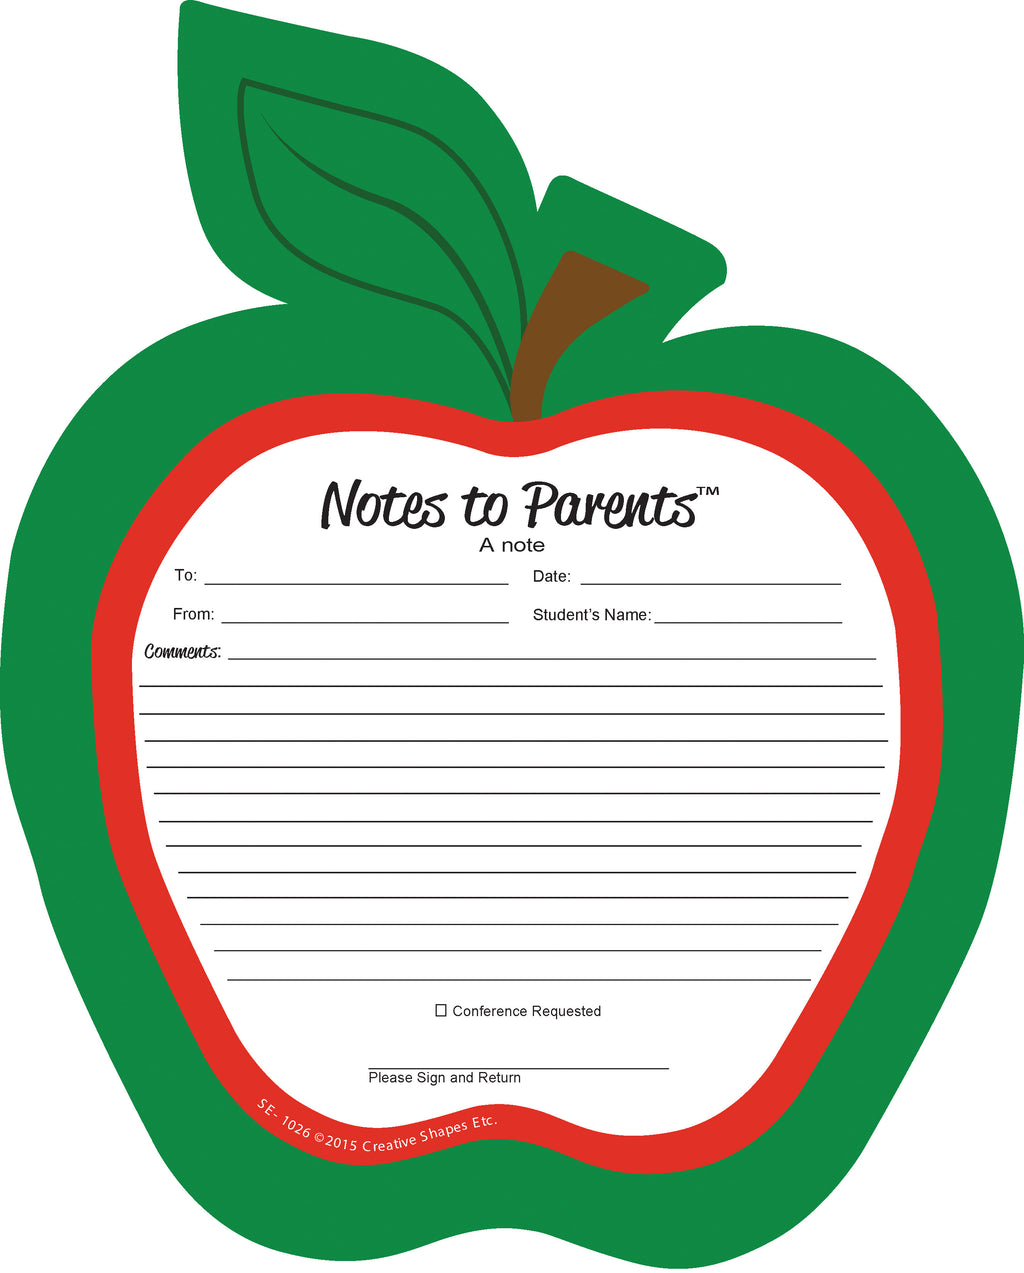 Red Apple Blank Pad - Notes to Parents - Creative Shapes Etc.